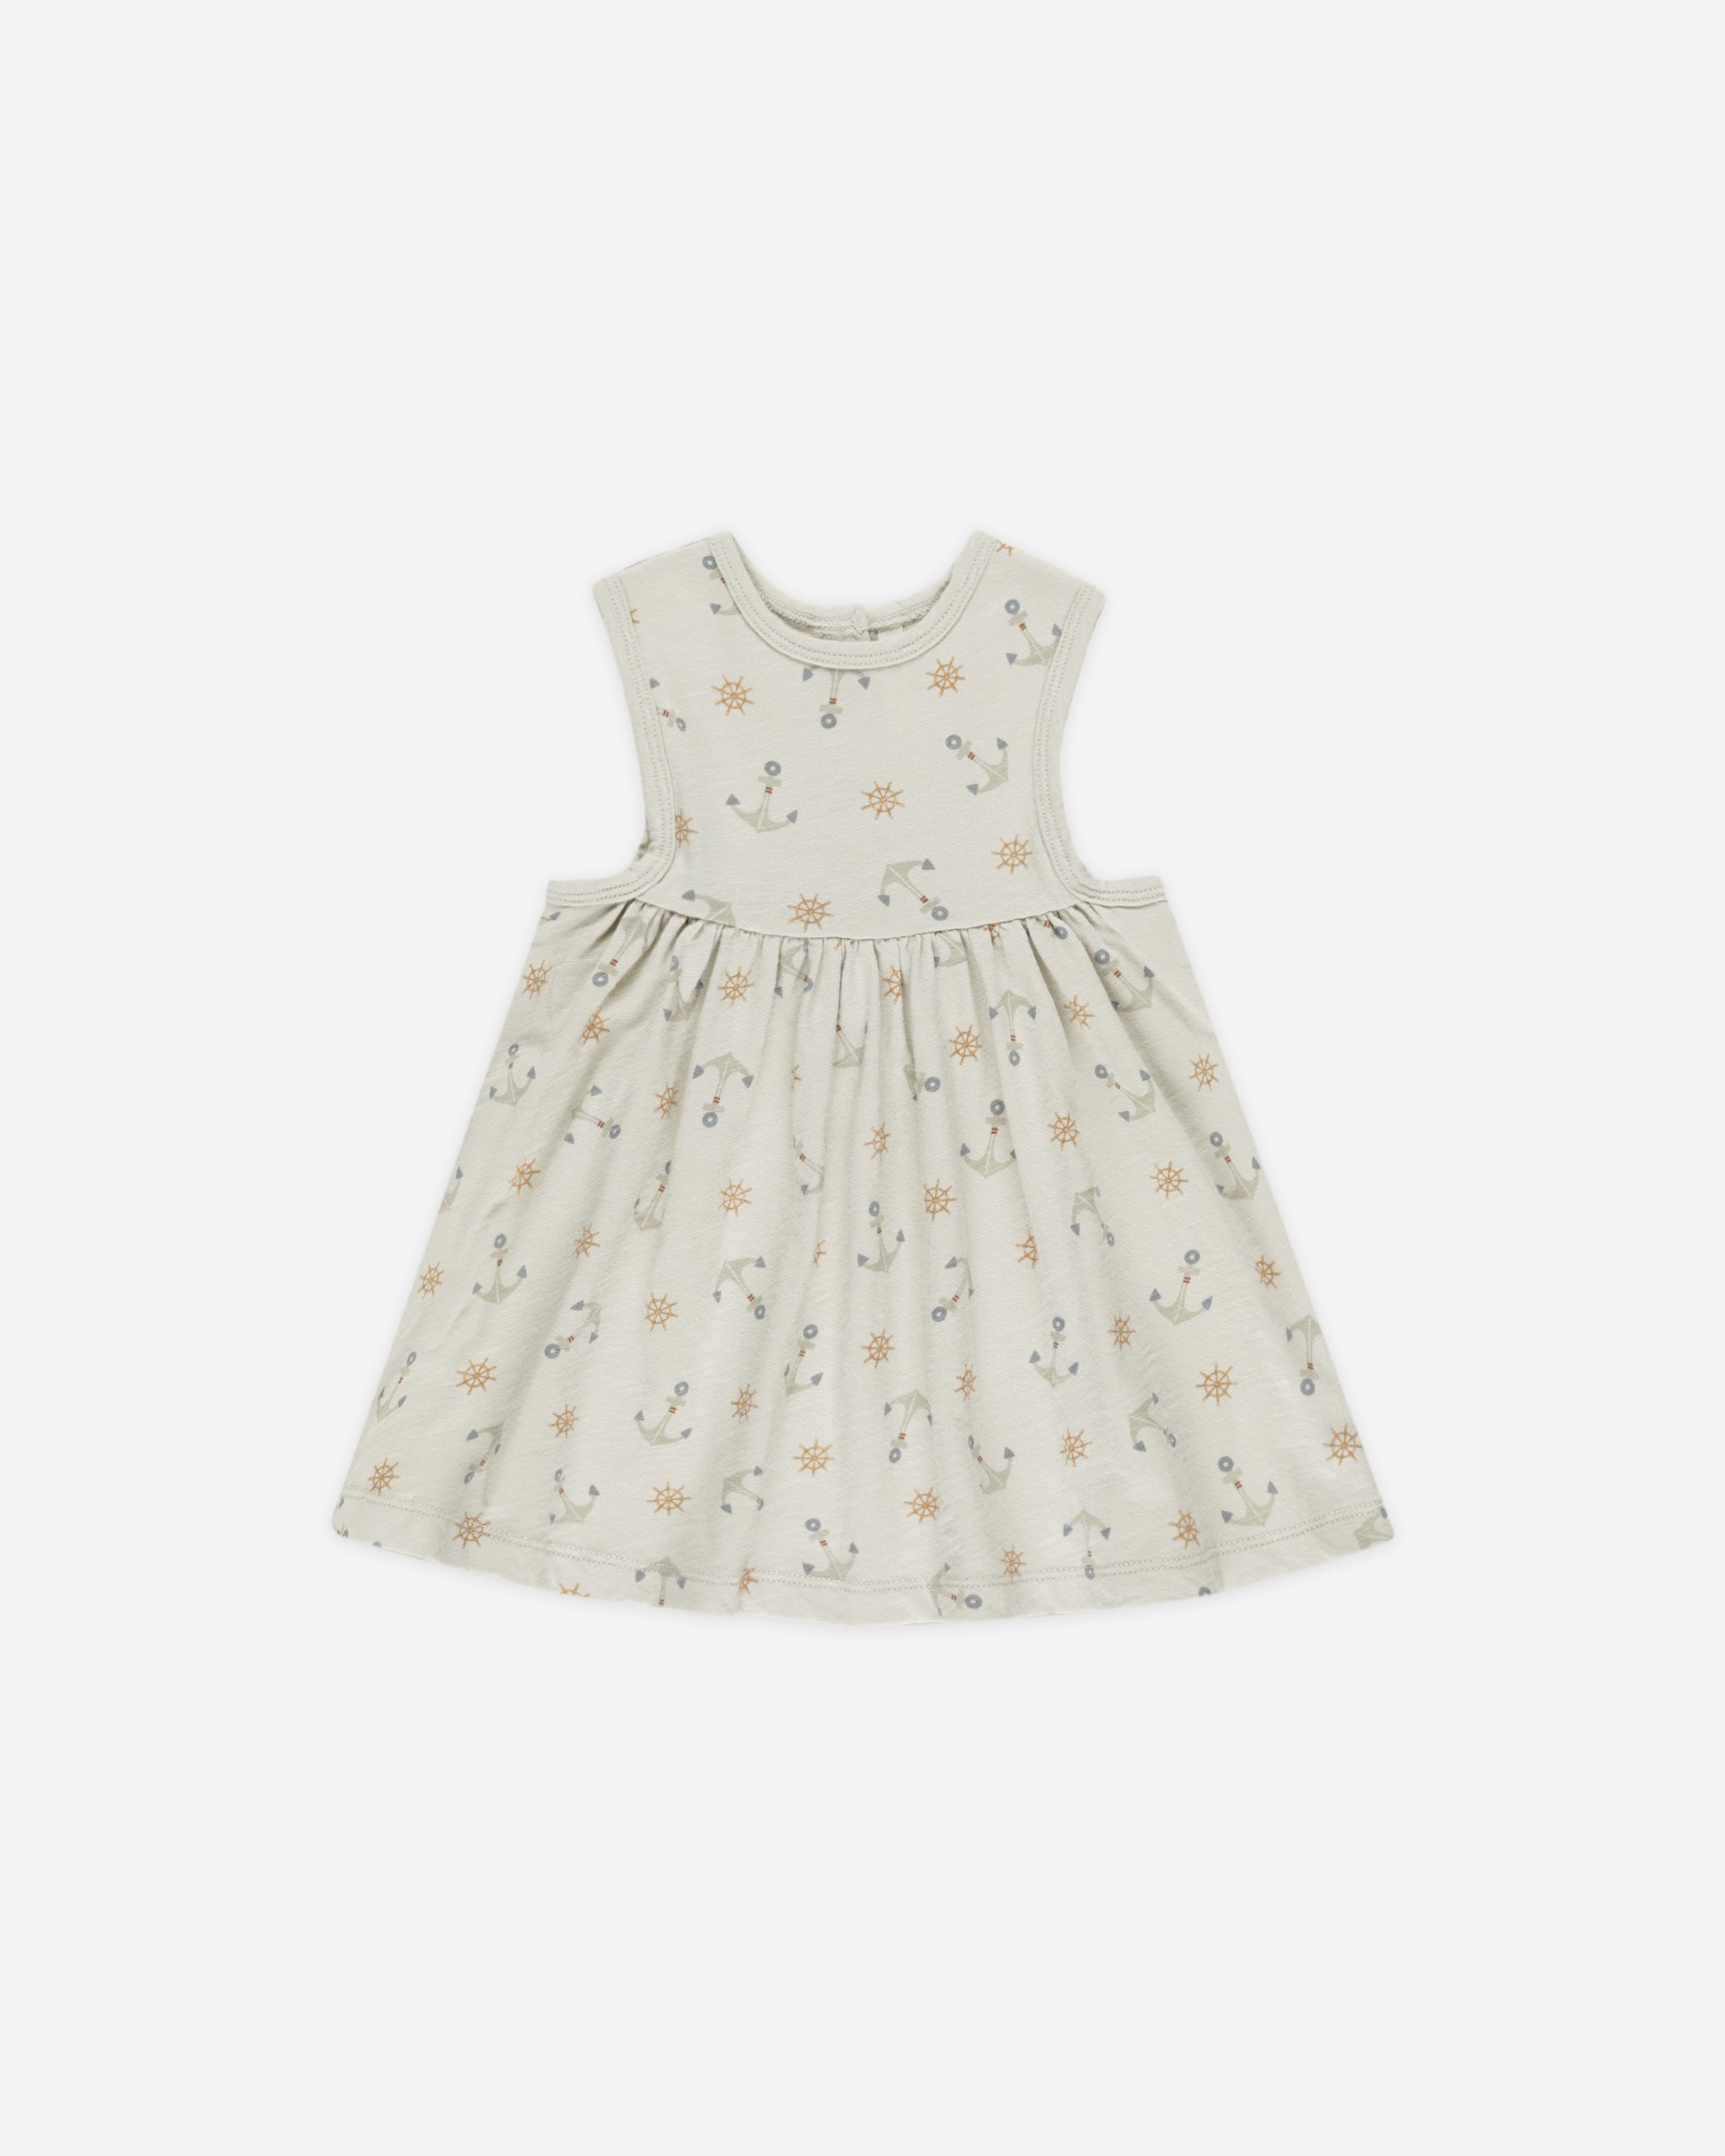 Layla Dress || Anchors - Rylee + Cru | Kids Clothes | Trendy Baby Clothes | Modern Infant Outfits |